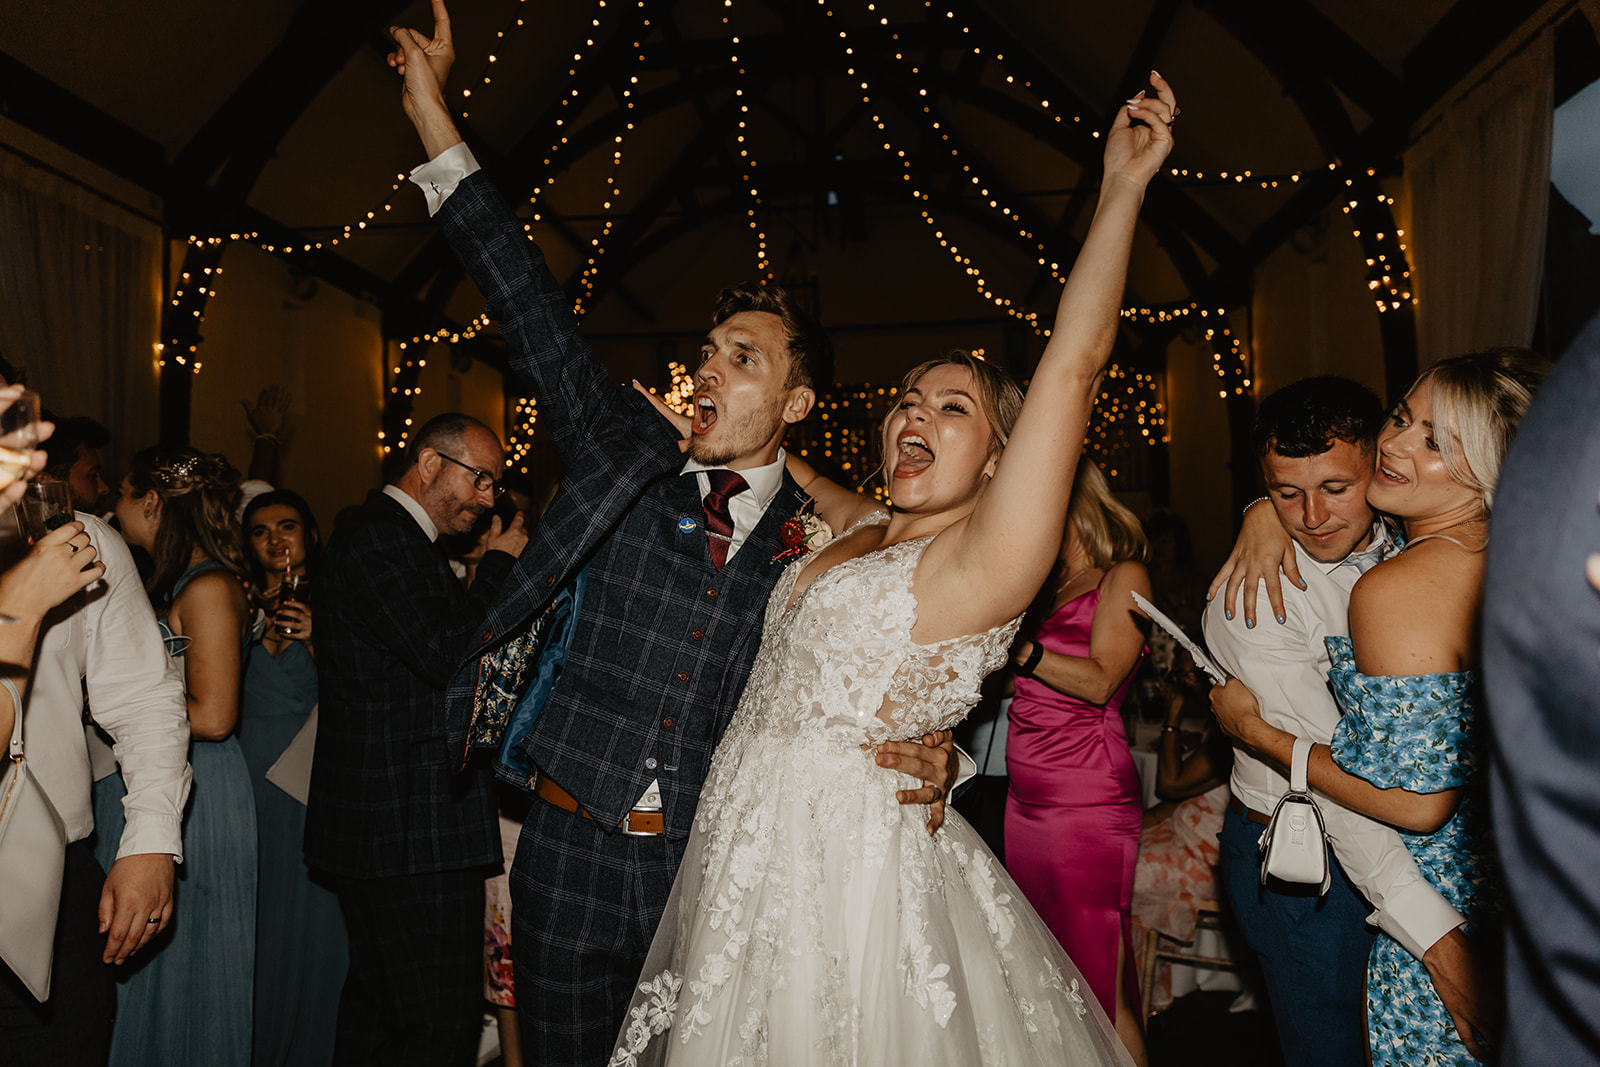 Bride and groom share a first dance at a wedding at Long Furlong Barn, Sussex. By OliveJoy Photography